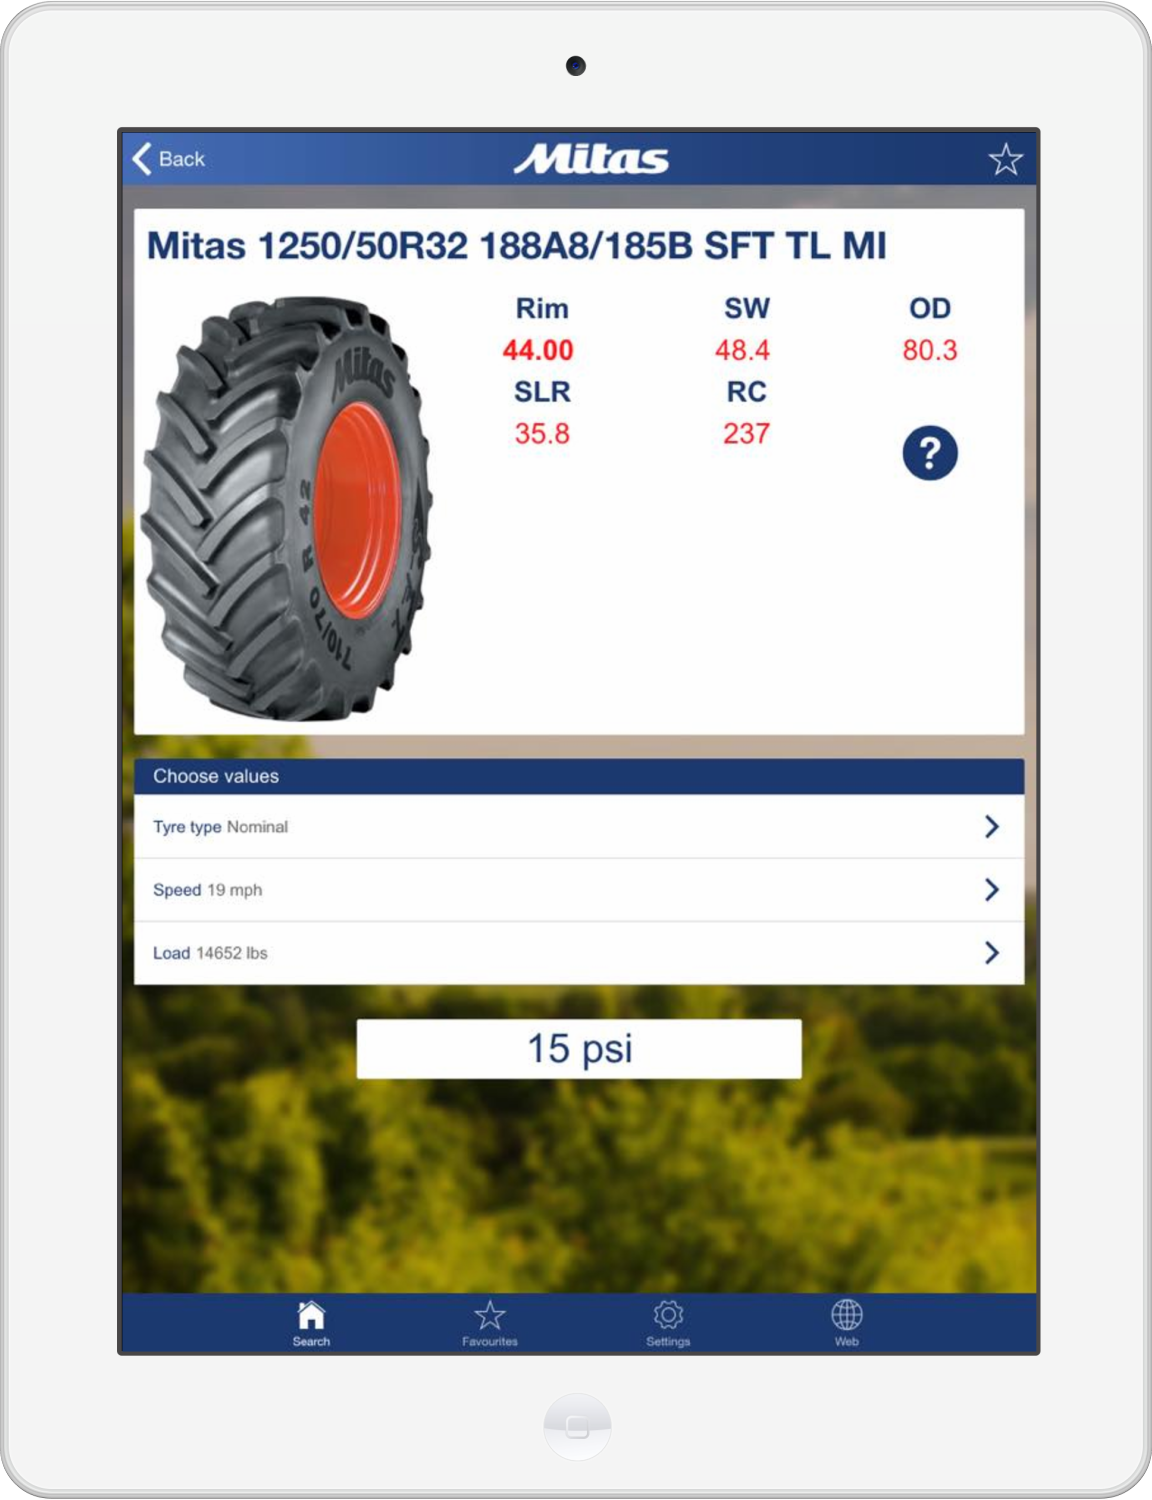 Mitas Unveils Mobile App to Help Farmers Choose Right Tire Pressure